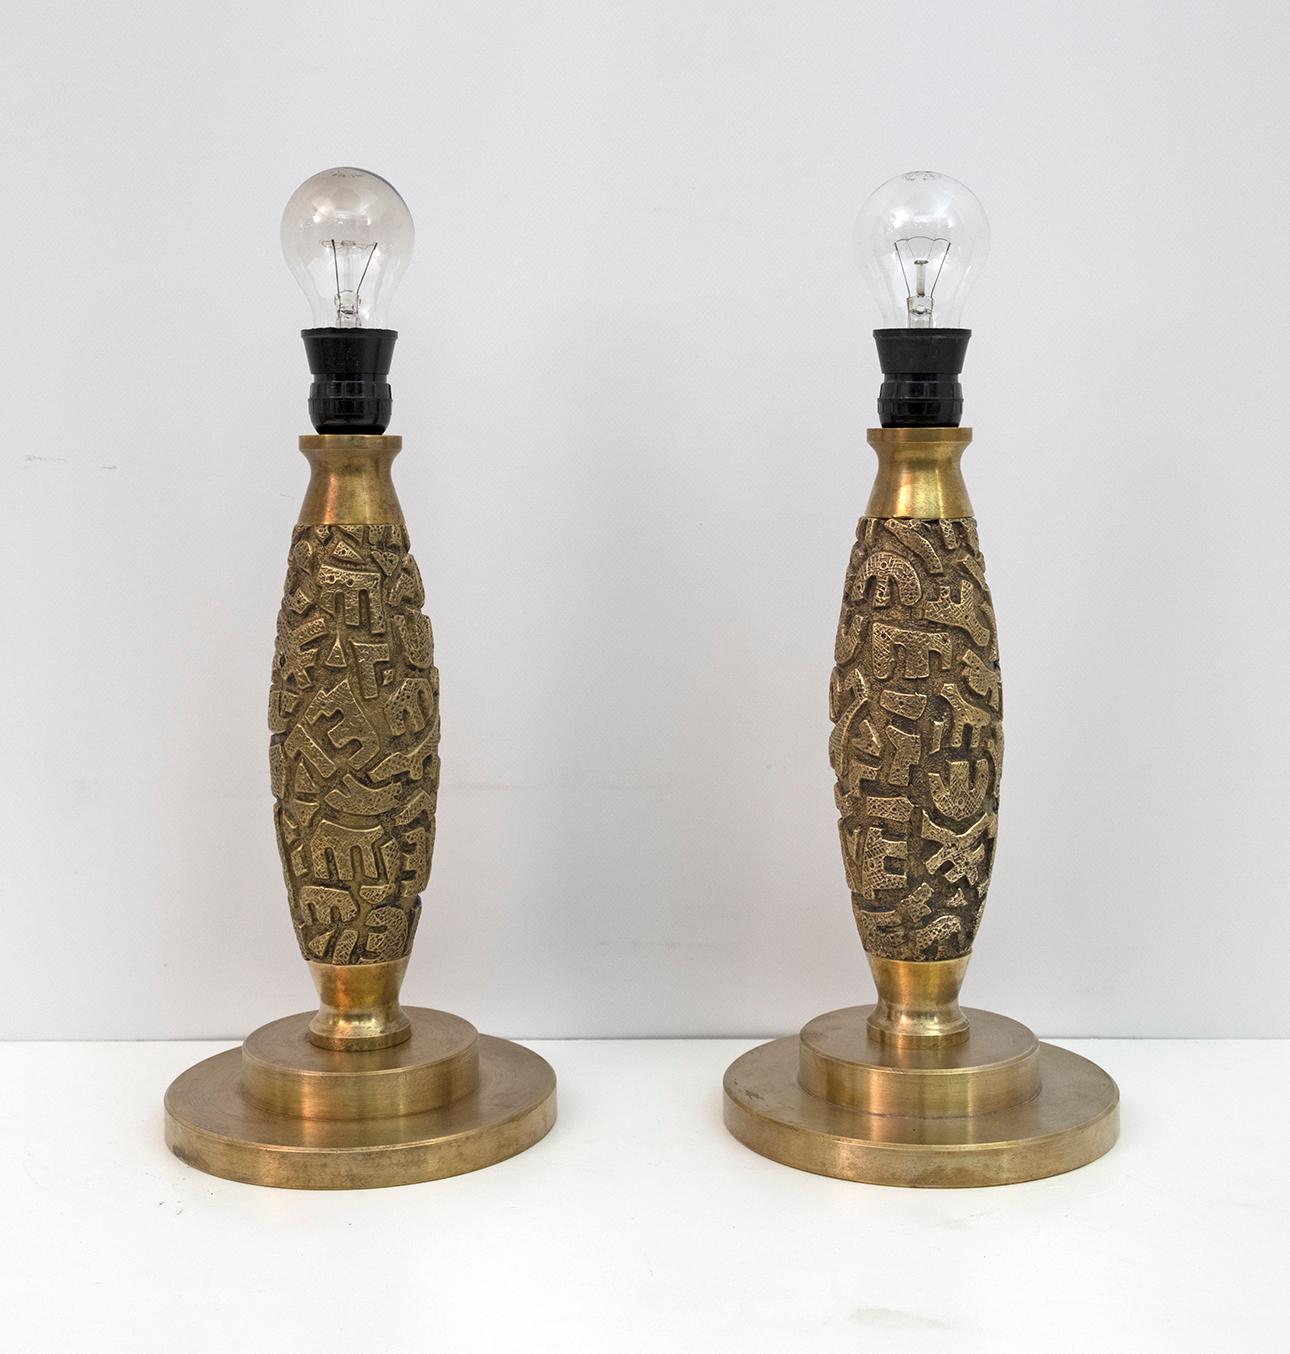 This pair of table lamps, produced in a limited series, were designed by Luciano Frigerio and produced by the homonymous company Frigerio Di Desio, Italy, 1974.
Handcrafted in brass and bronze casting.
They are sold without the lampshade